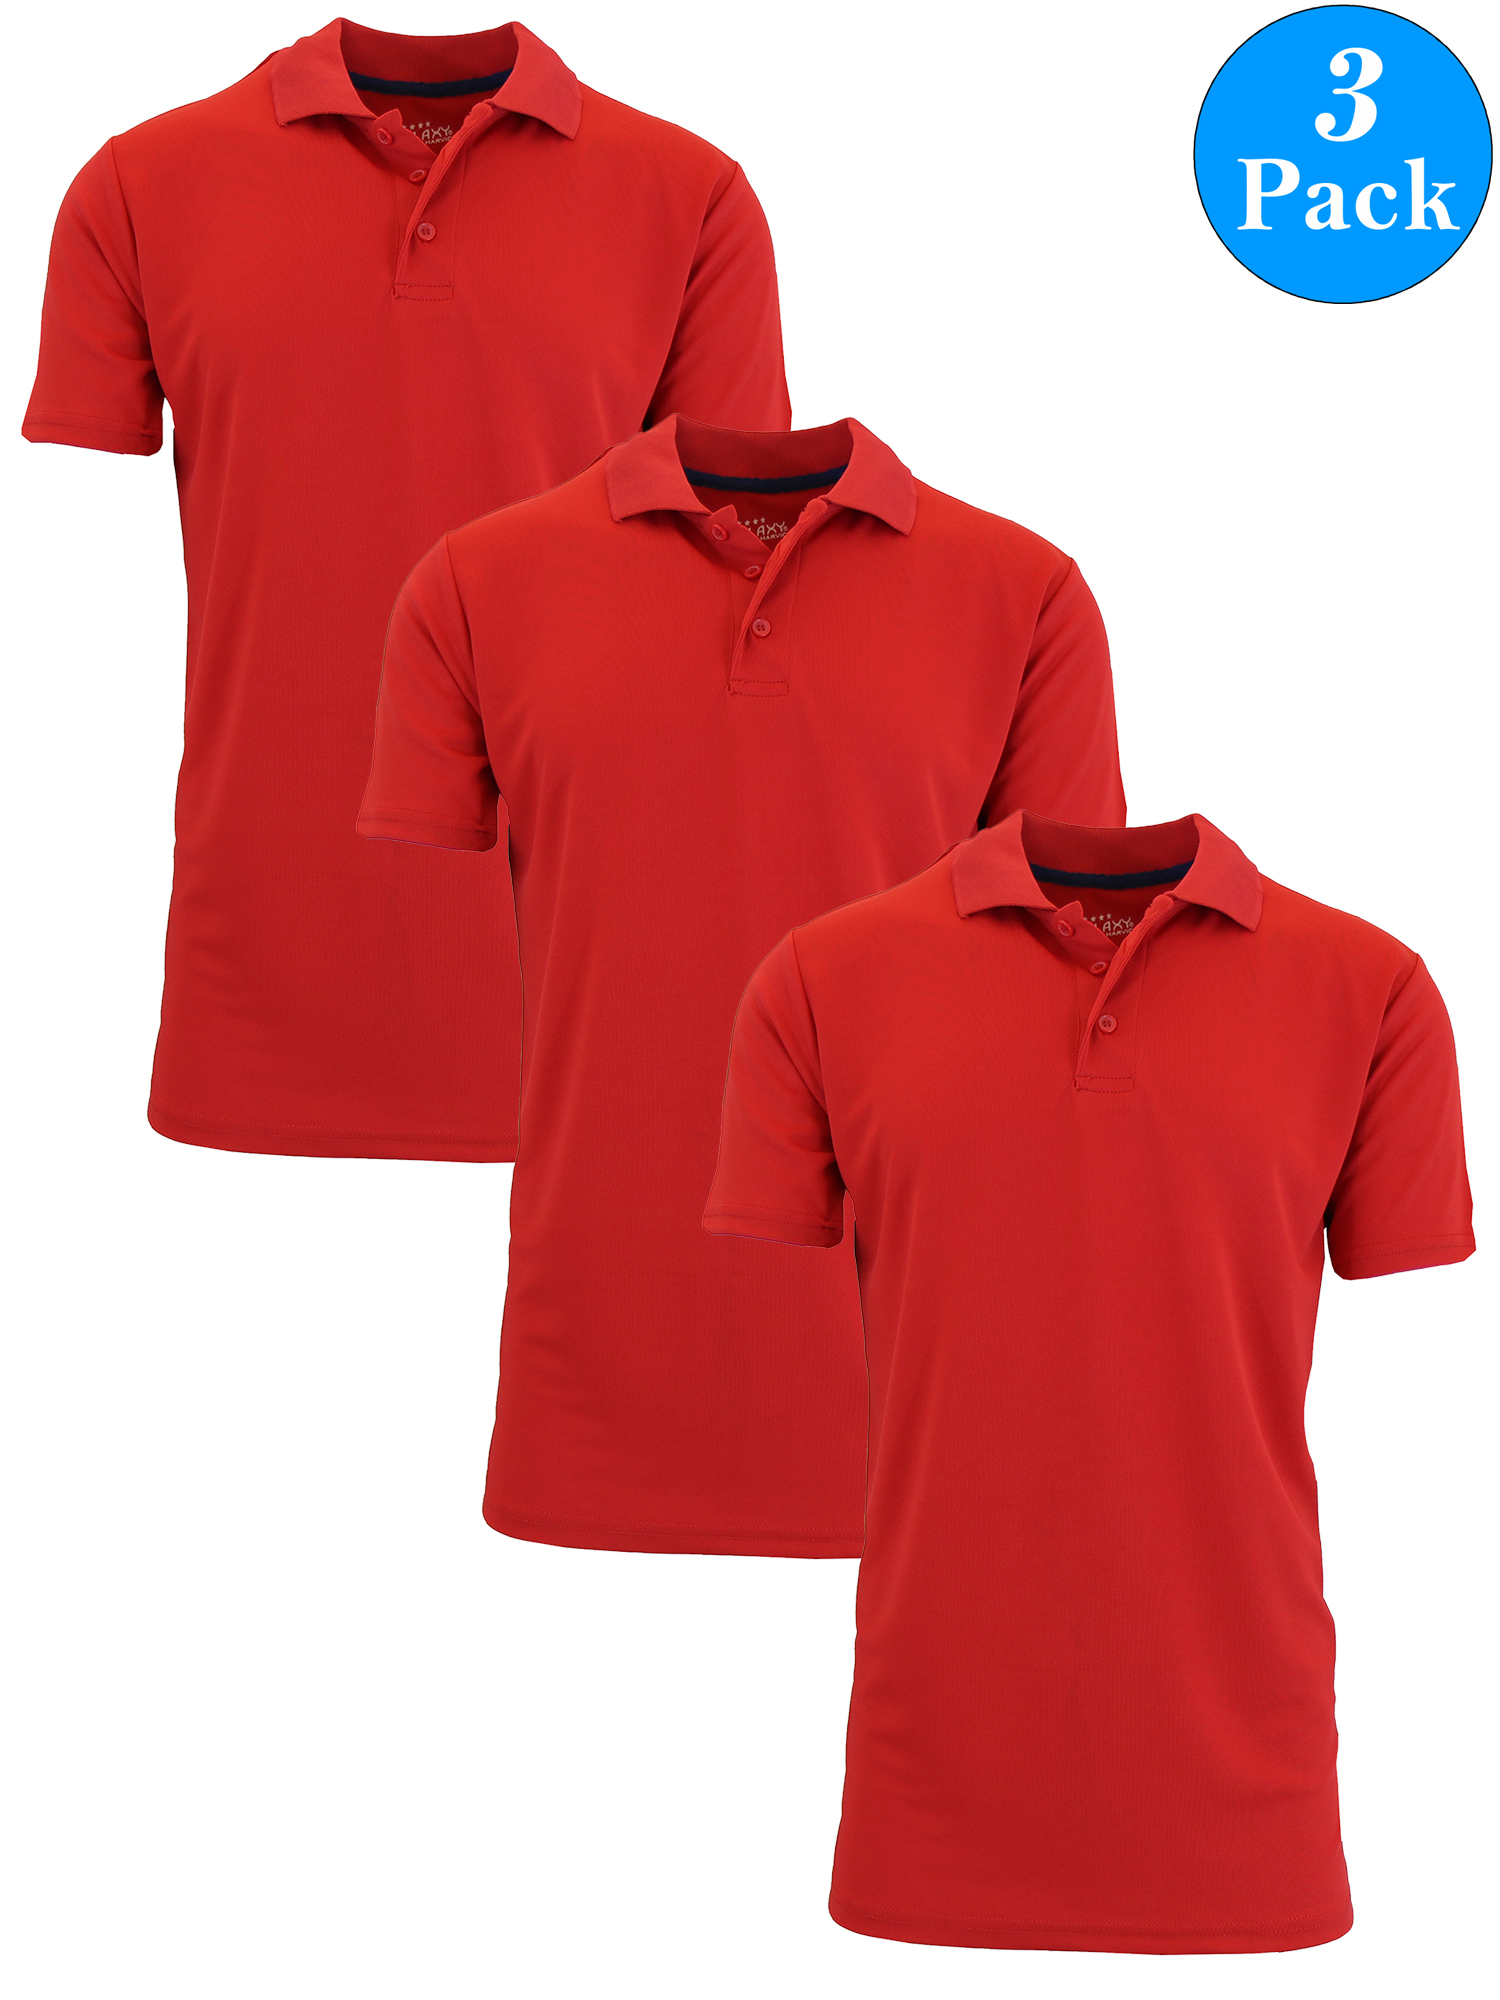 Men's Dry Fit Moisture-Wicking Polo Shirt (3-Pack)